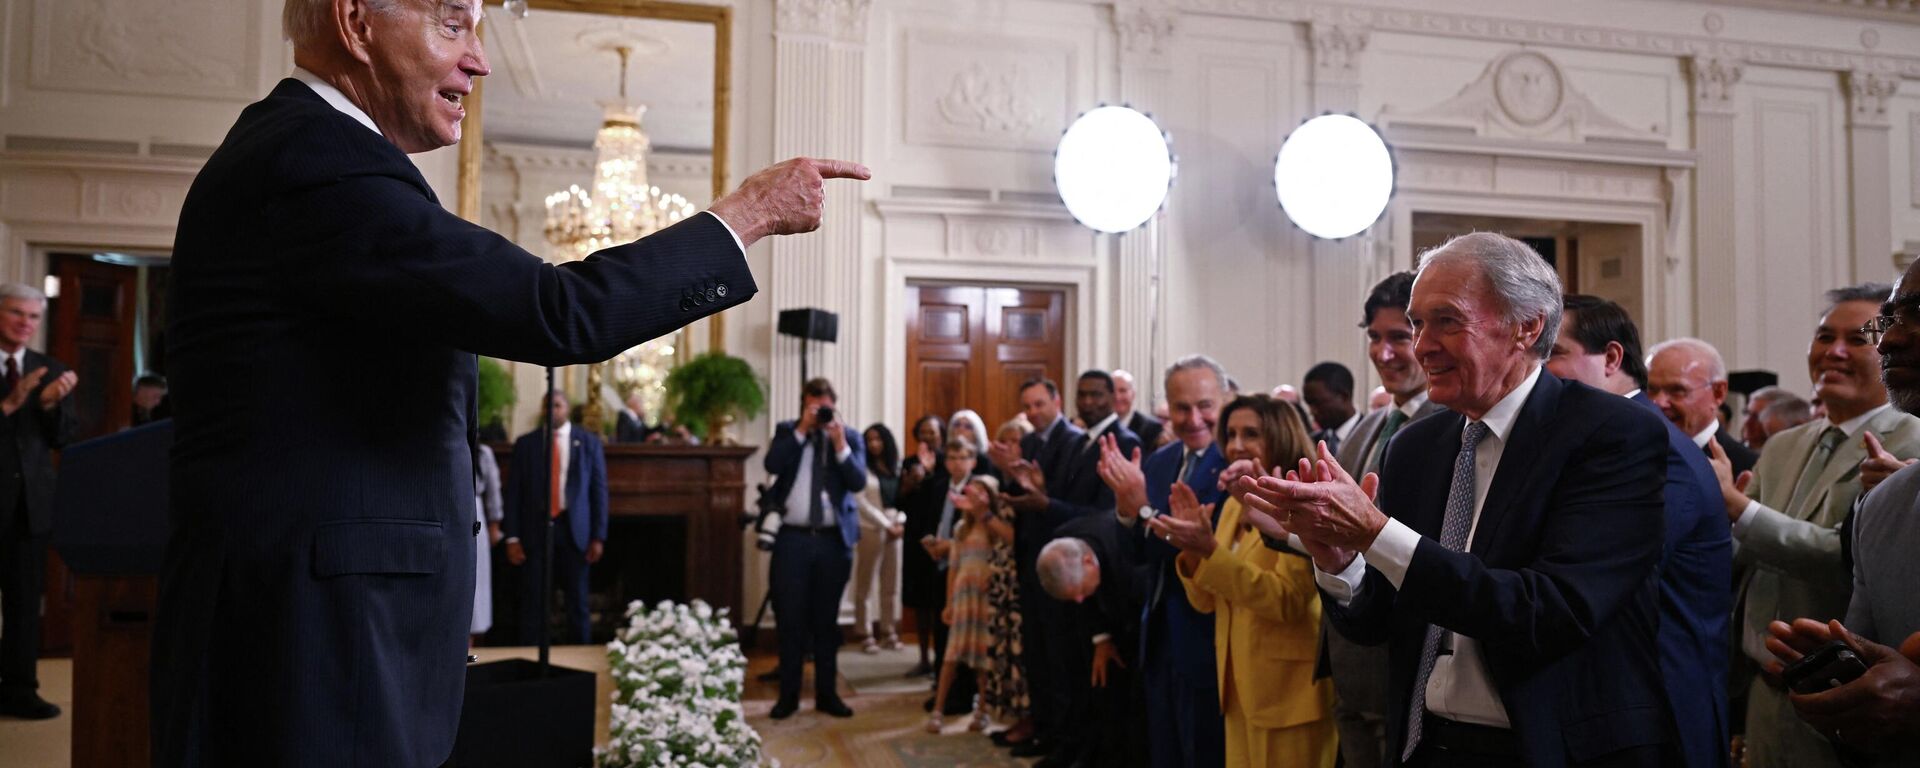 US President Joe Biden gestures after speaking on the anniversary of the Inflation Reduction Act in the East Room of the White House in Washington, DC, on August 16, 2023. - Sputnik International, 1920, 17.08.2023